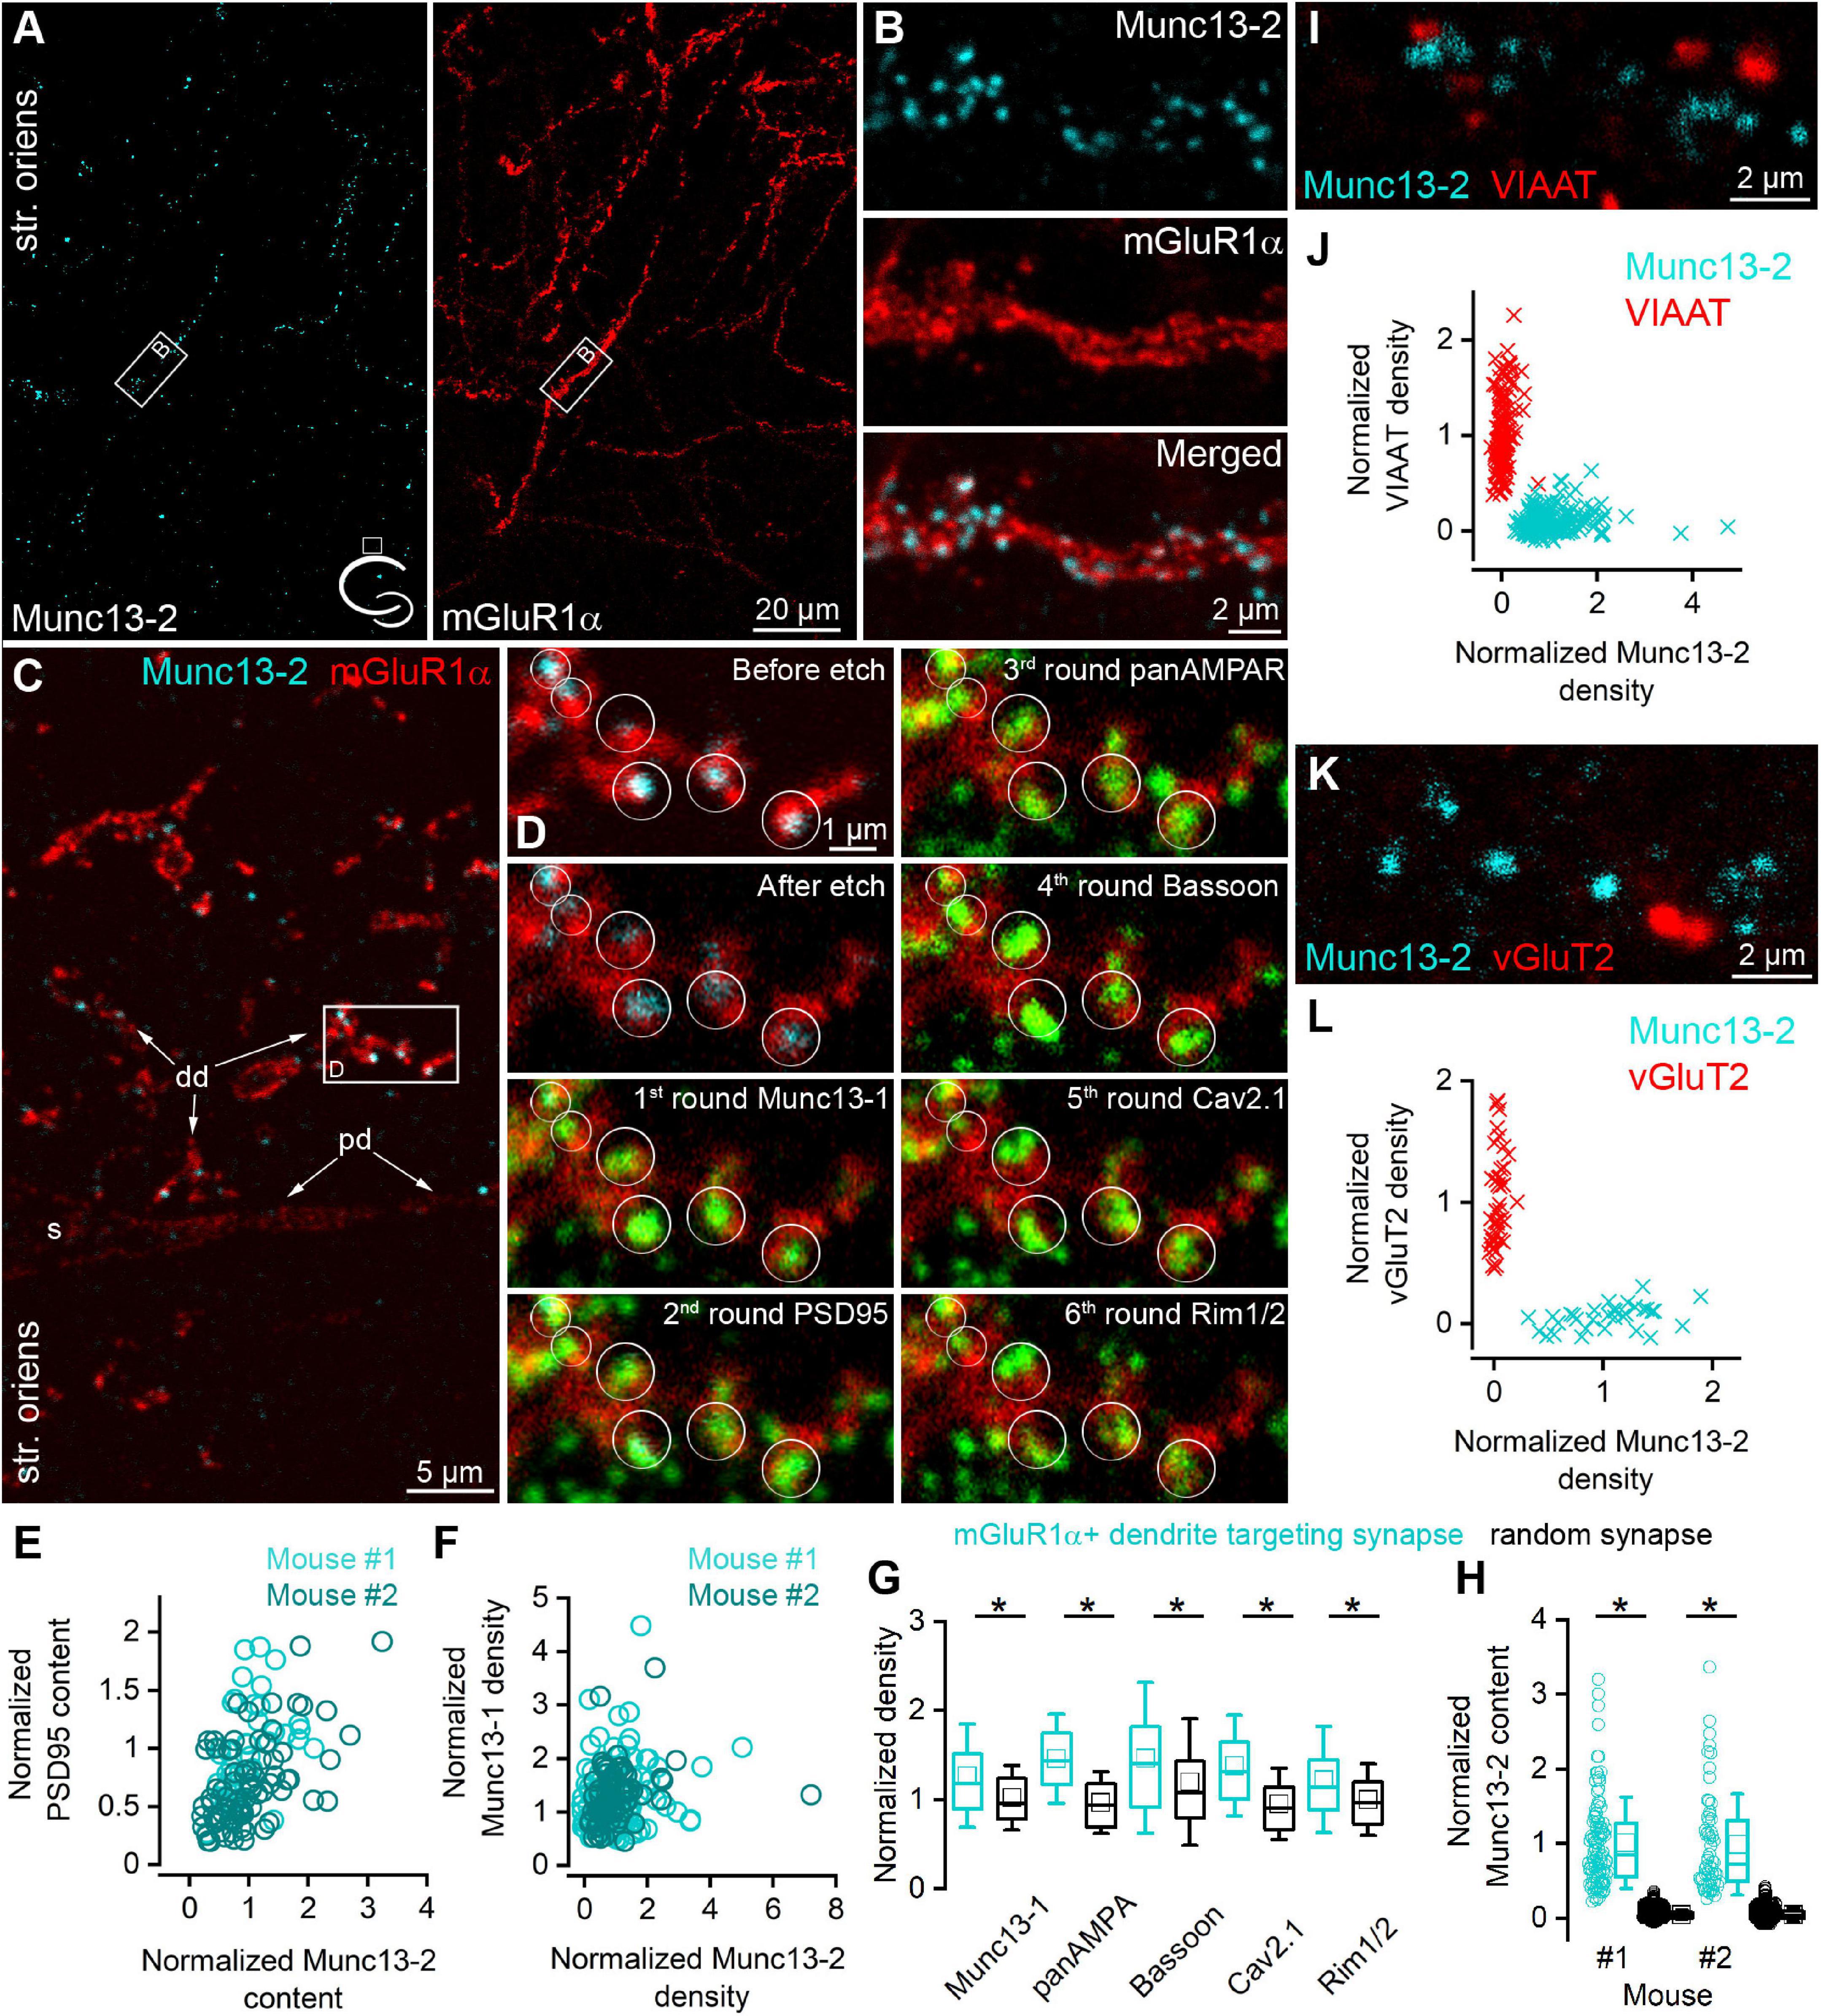 Frontiers | Selective Enrichment of Munc13-2 in Presynaptic Active 